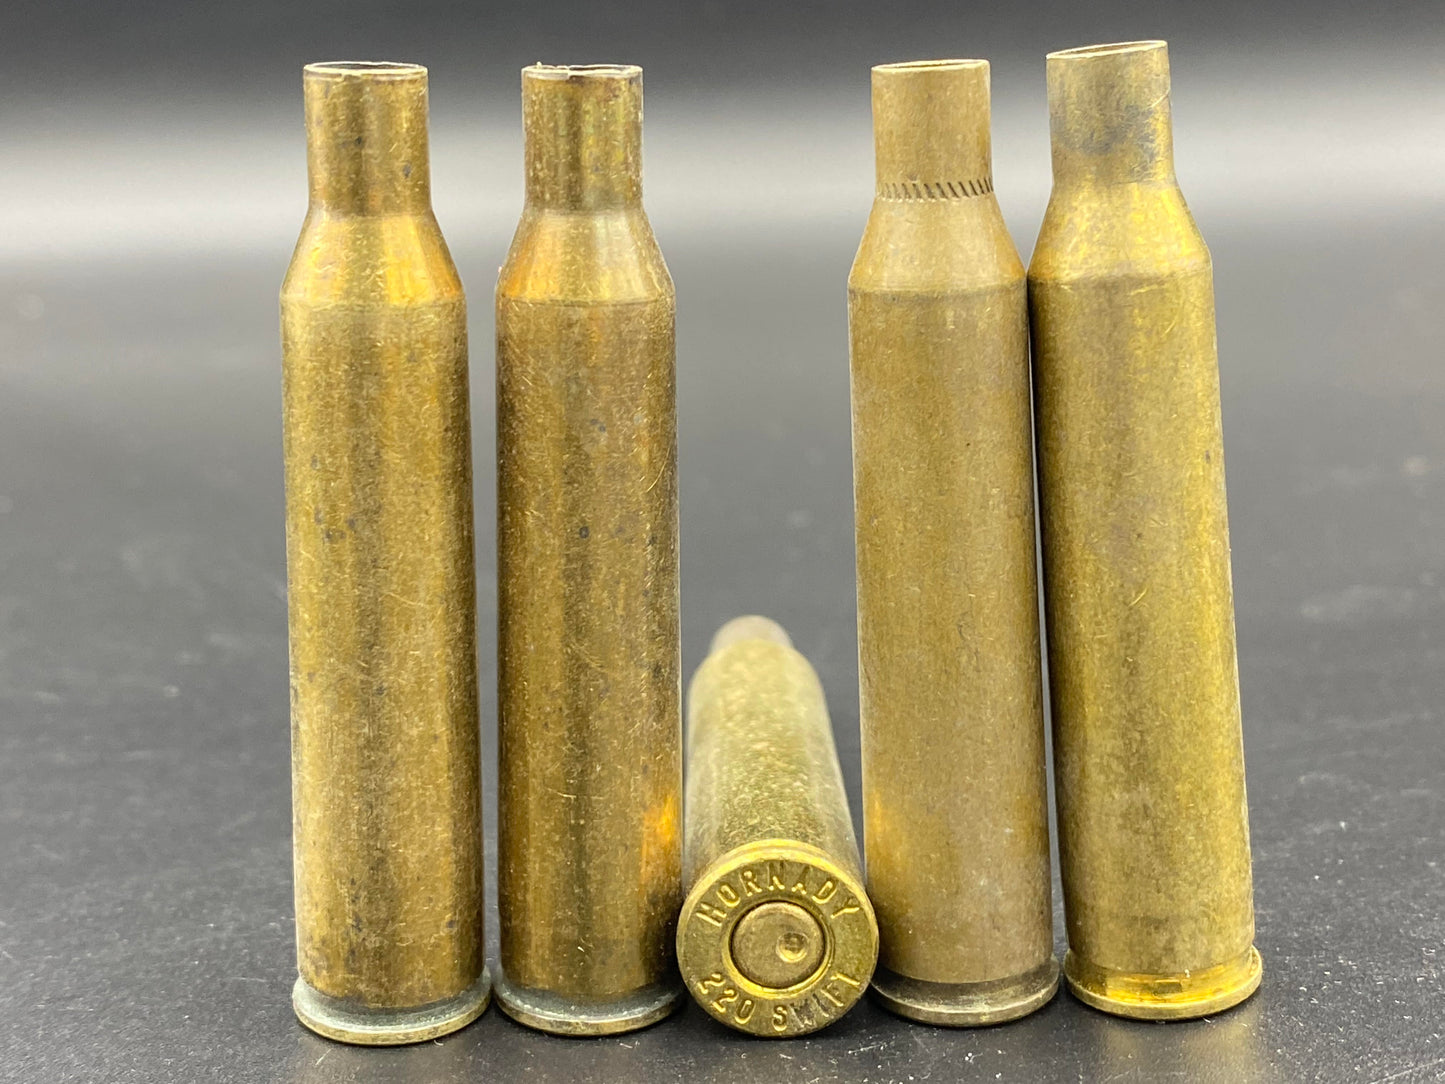 220 Swift once fired rifle brass. Hand sorted from reputable indoor/military ranges for reloading. Reliable spent casings for precision shooting.